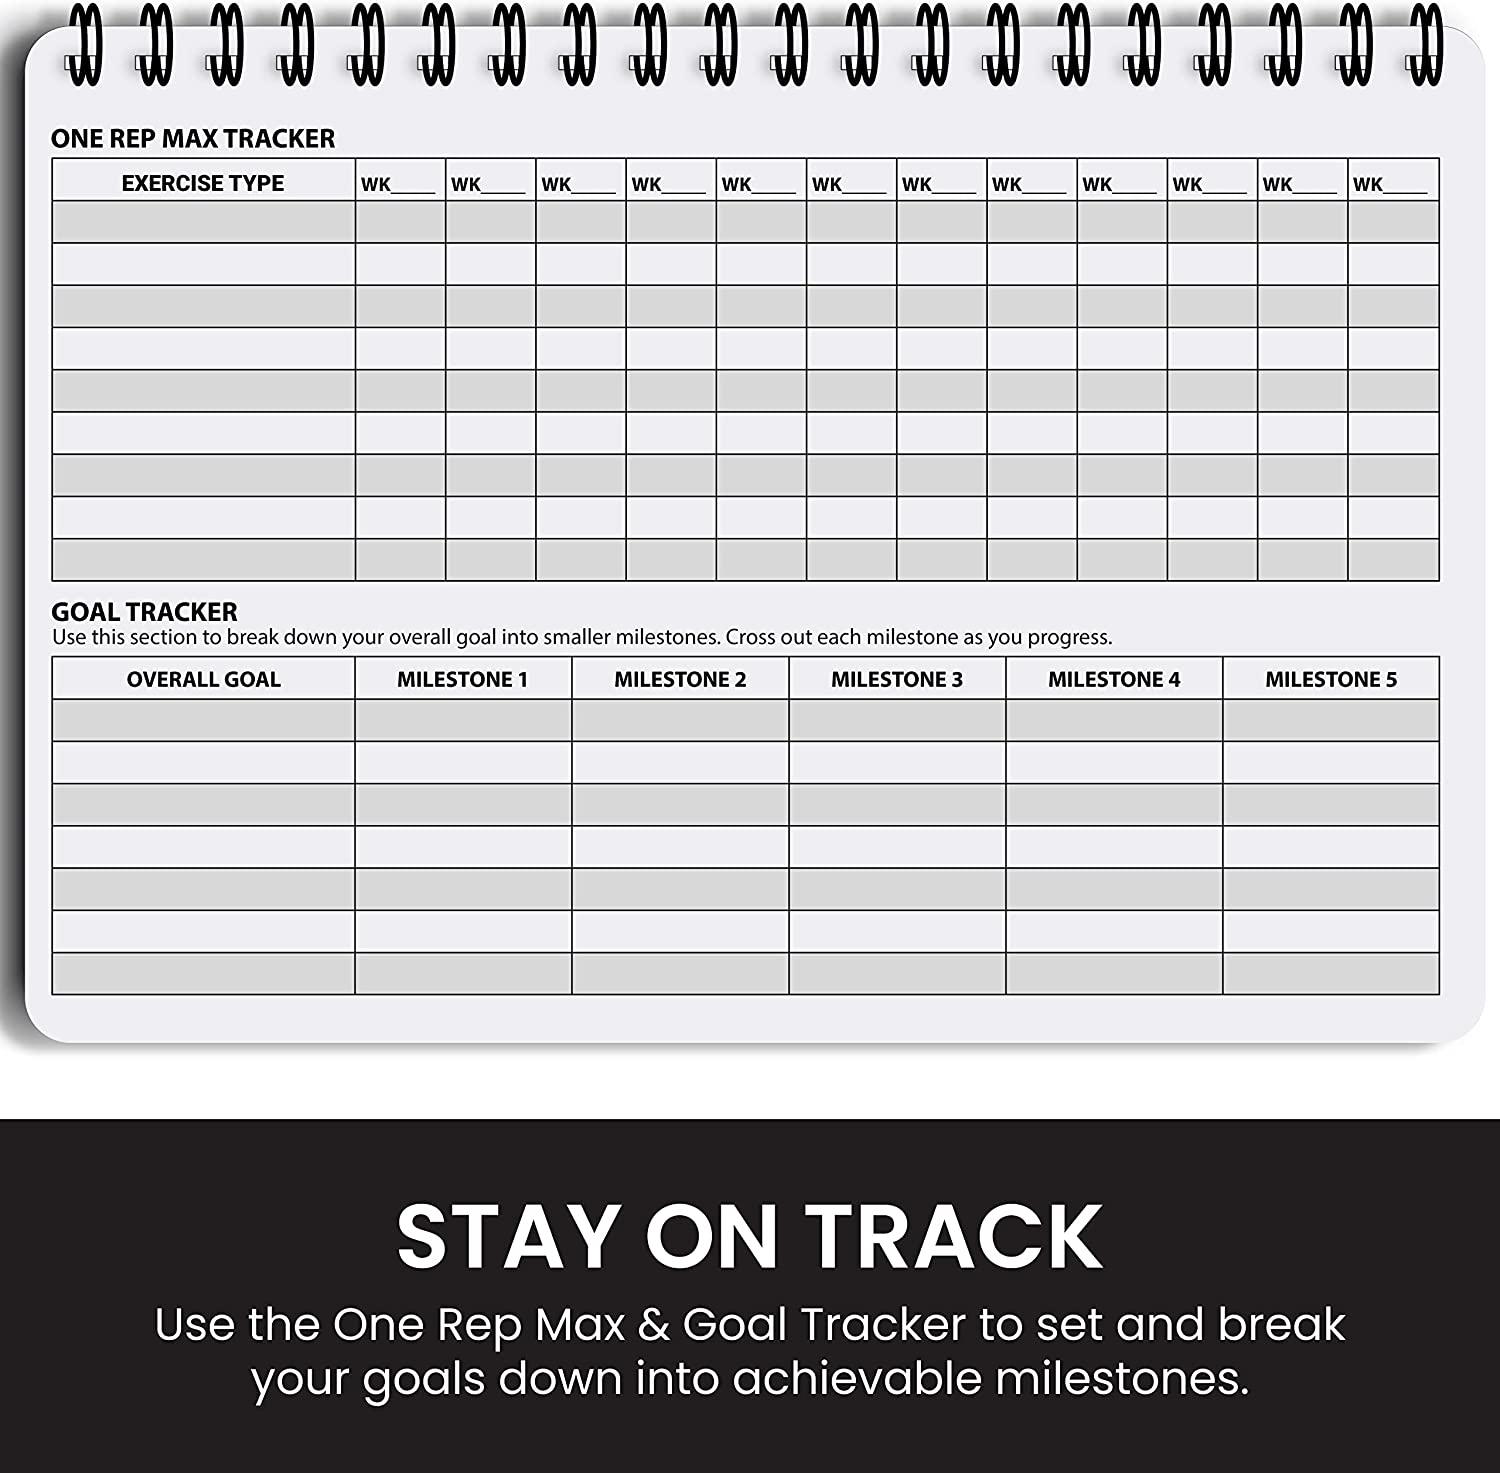 Ultimate Fitness Journal Gym Workout Log Book 6 x 8 Inches Track 100  Workouts - Exercise Weightlifting Training Diary for Men Women - Set Goals  Track Progress (Black)